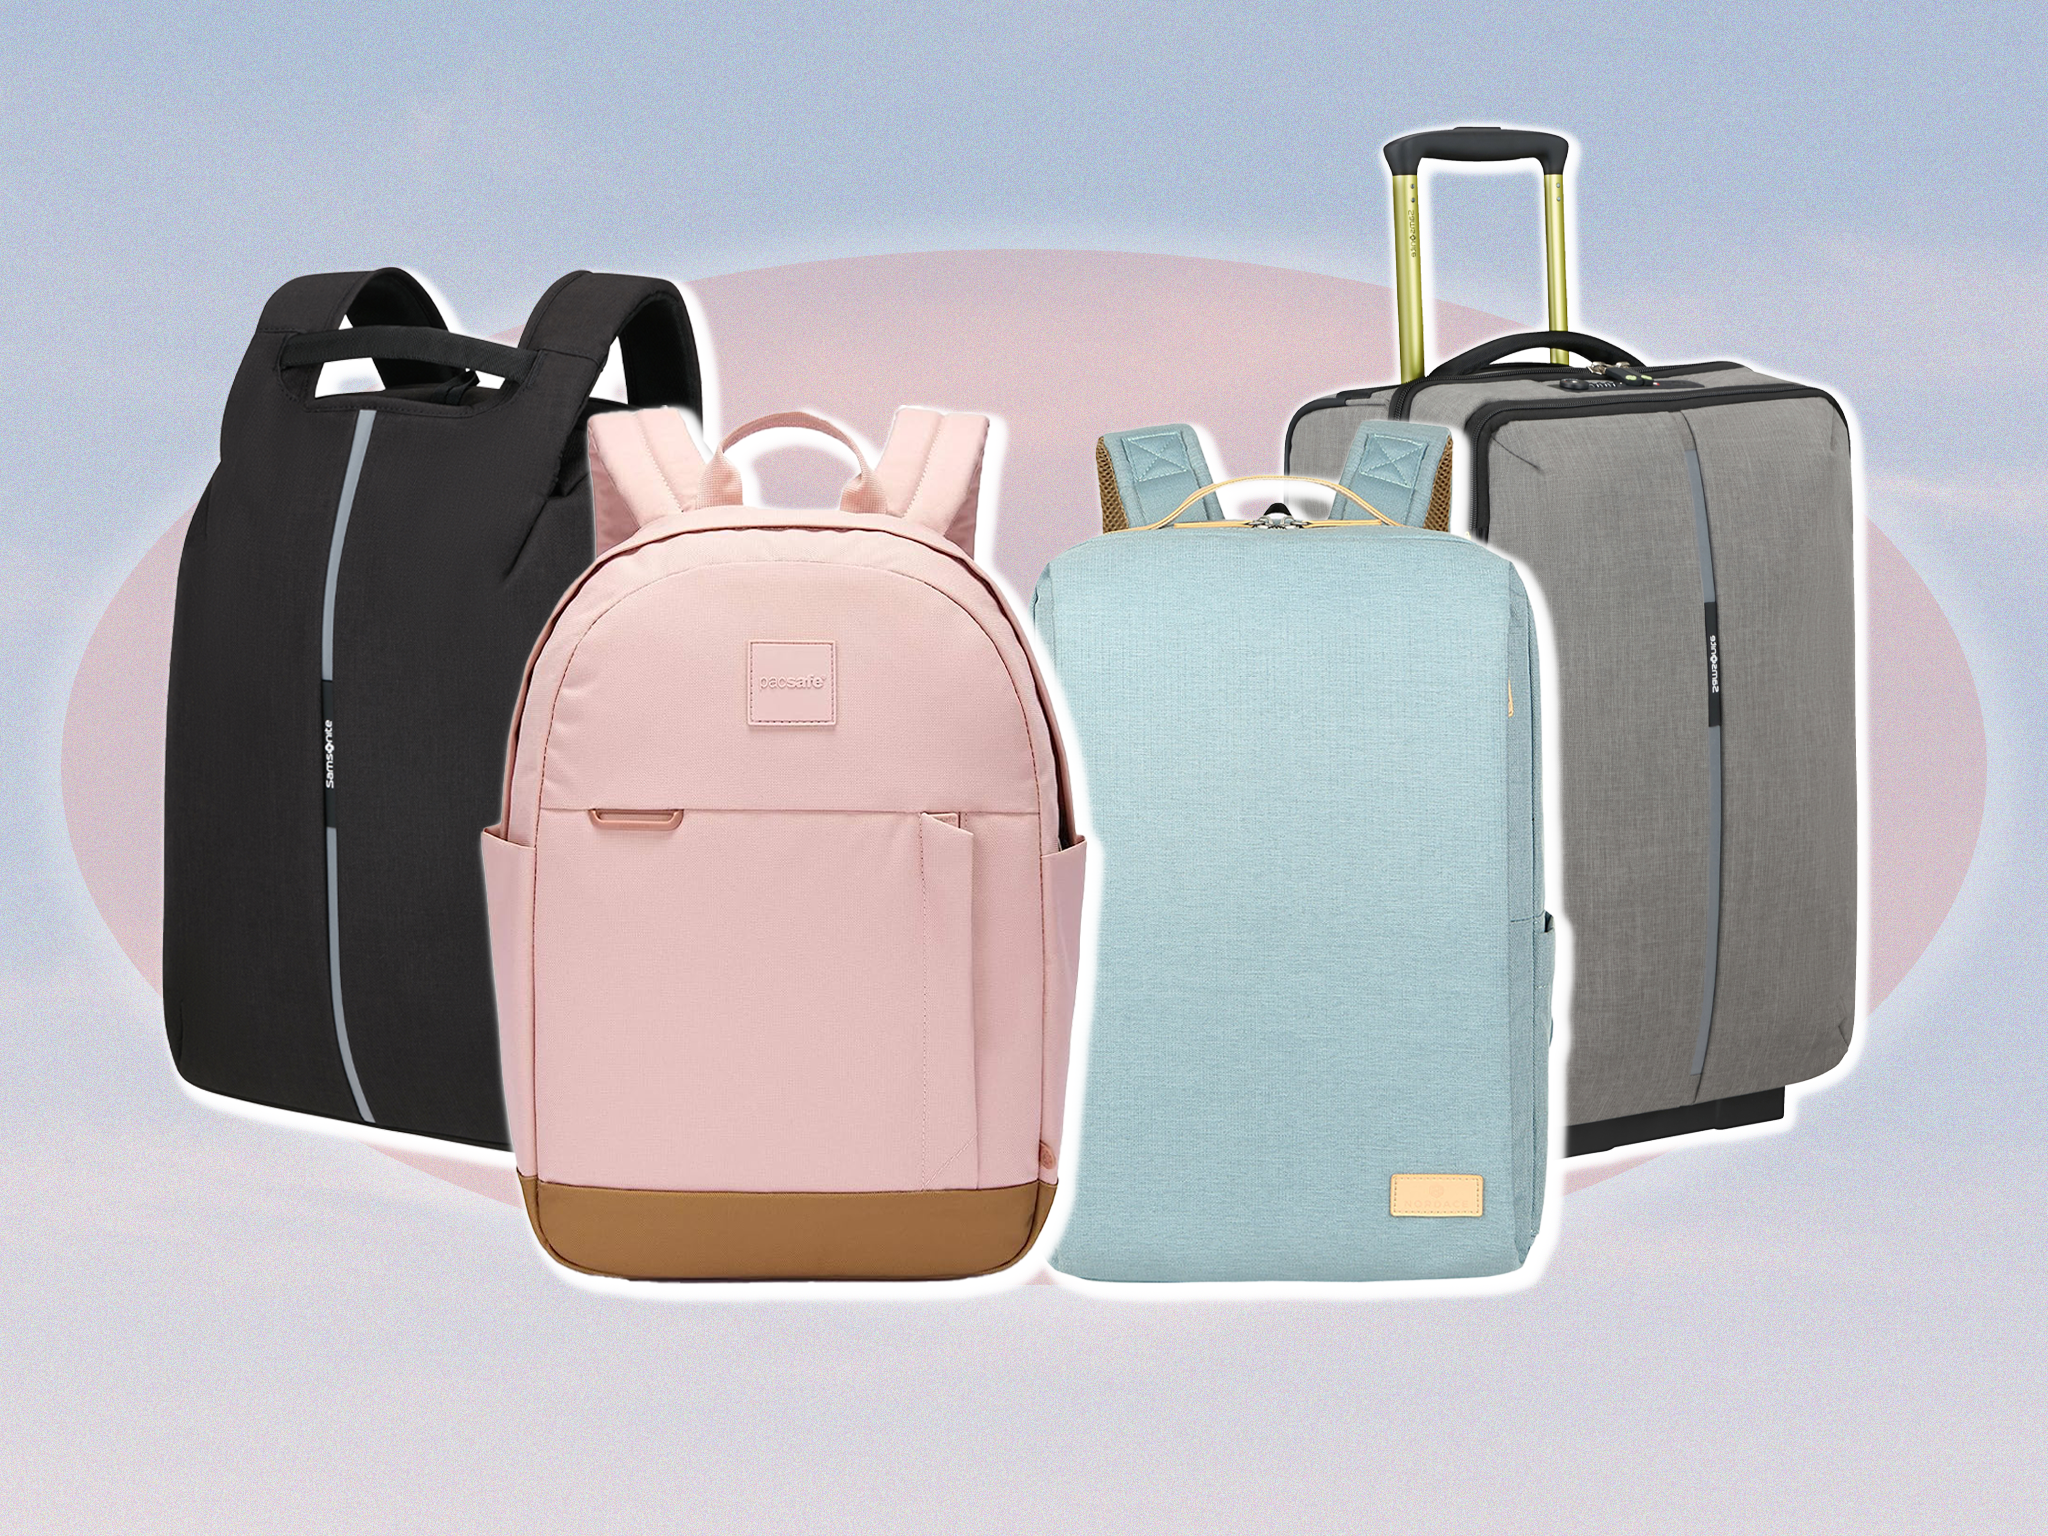 <p>These clever luggage options have key security features, including anti-cut material </p>